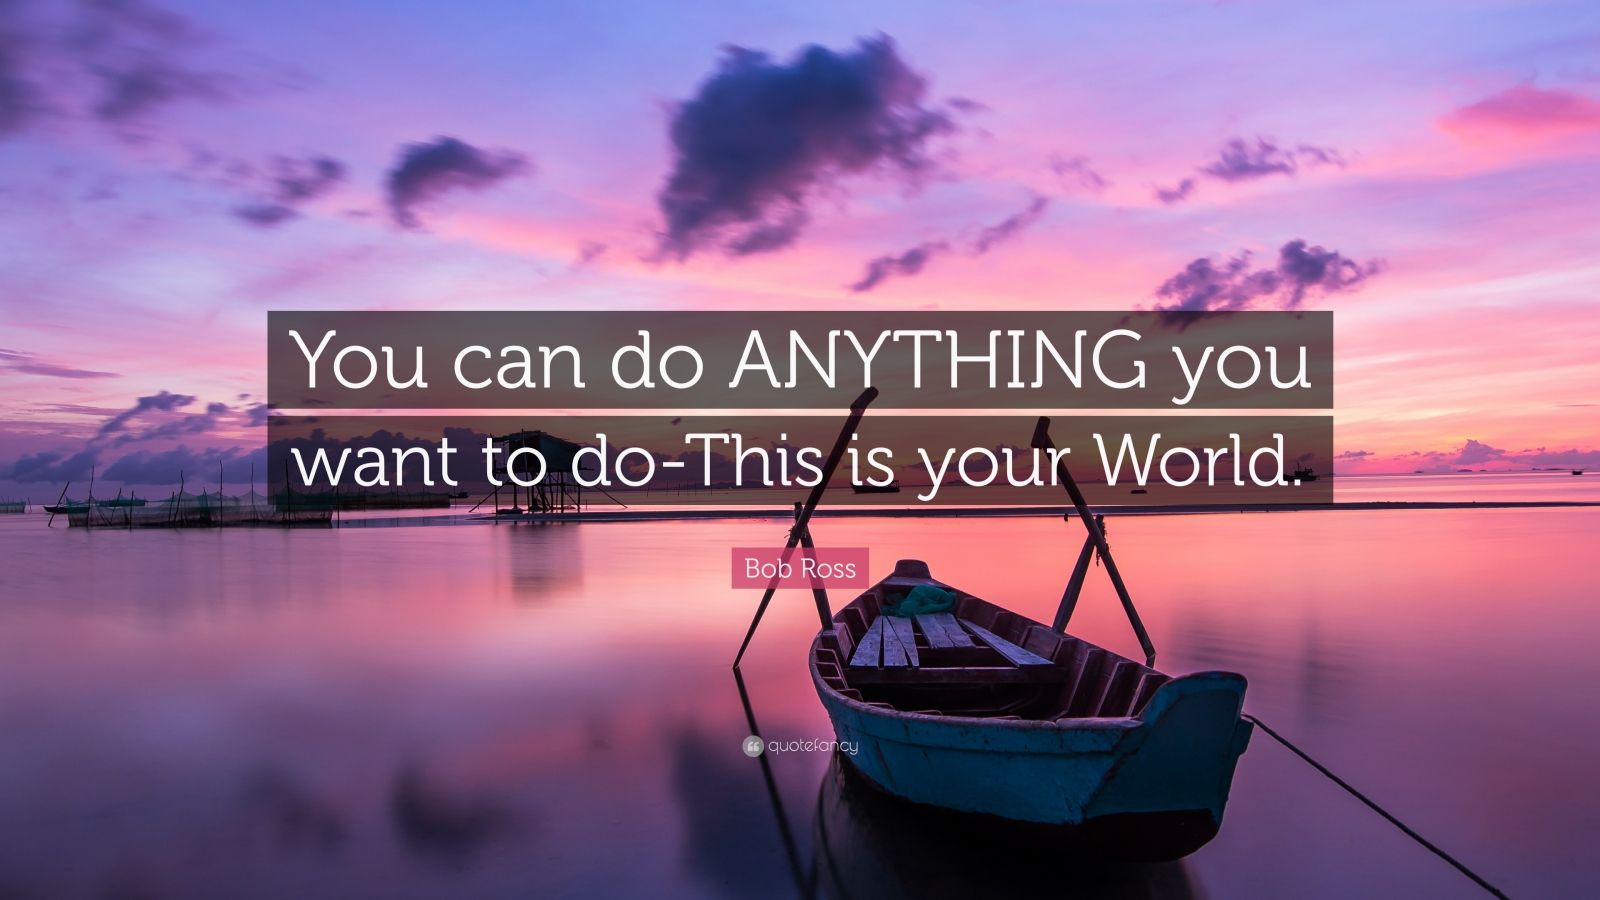 2127572 Bob Ross Quote You Can Do ANYTHING You Want To Do This Is Your 